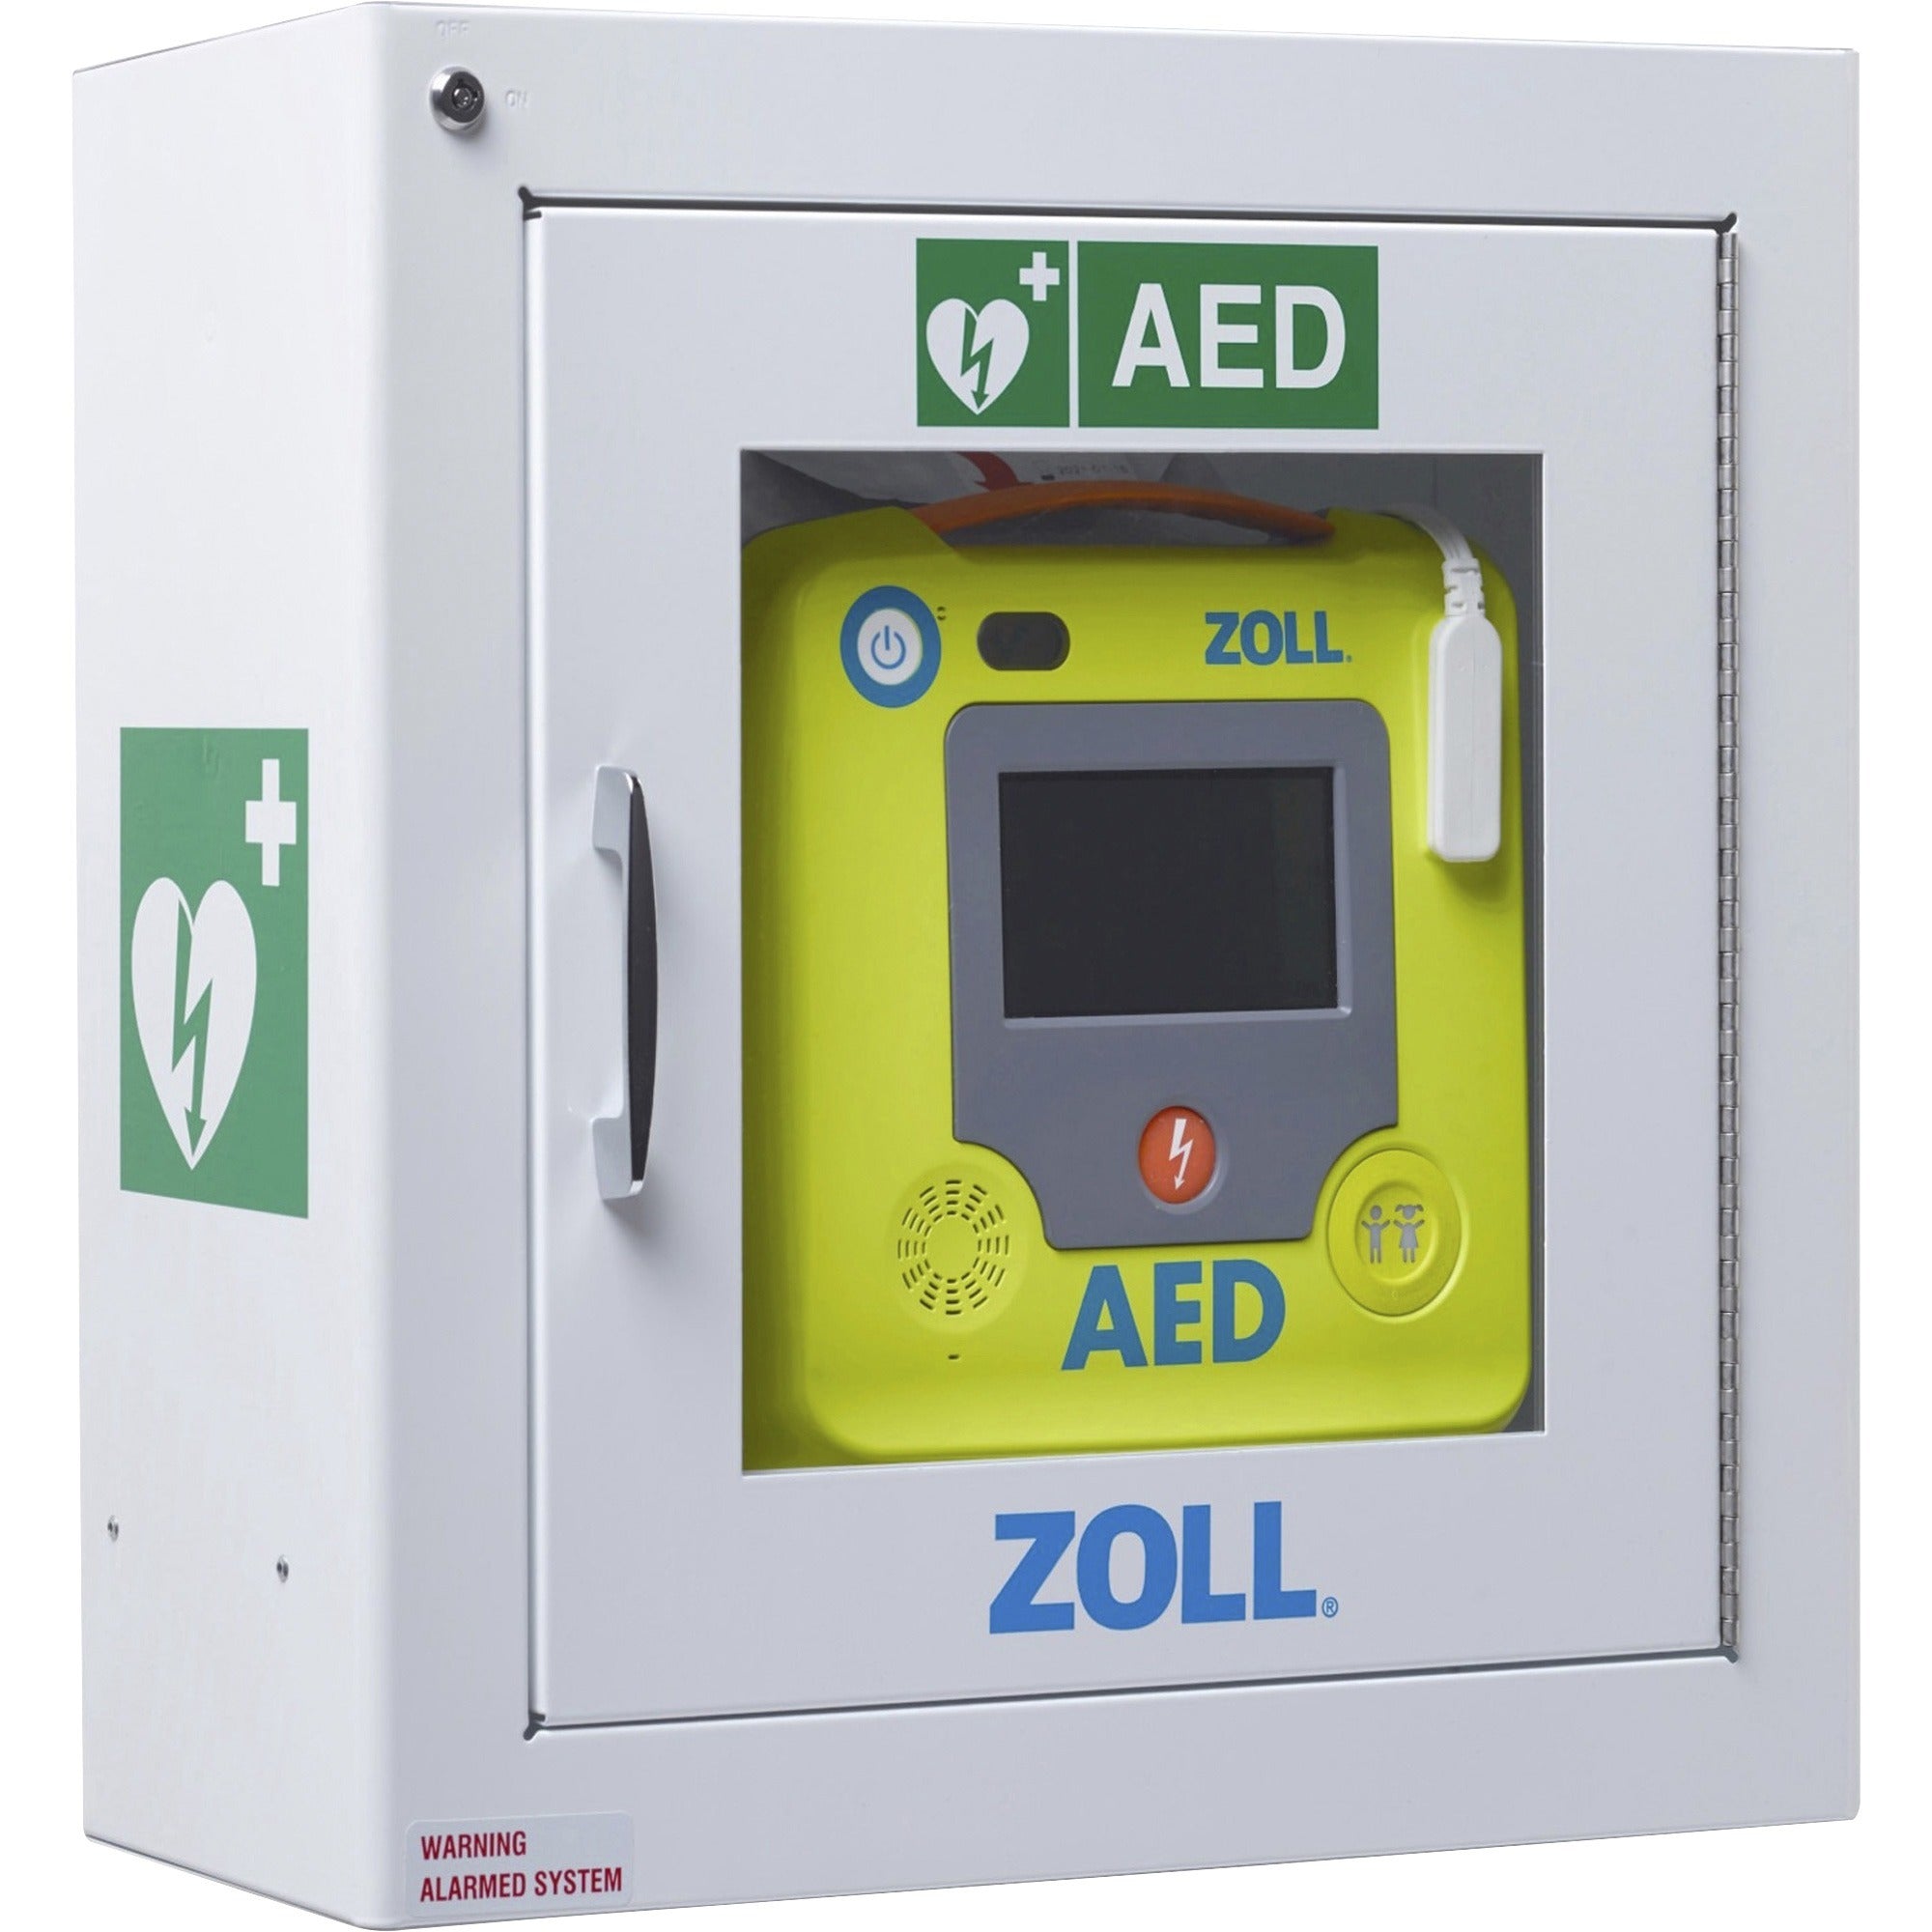 zoll-medical-aed-3-surface-mounted-wall-cabinet-175-x-7-x-175-wall-mountable-green_zol8000001256 - 1